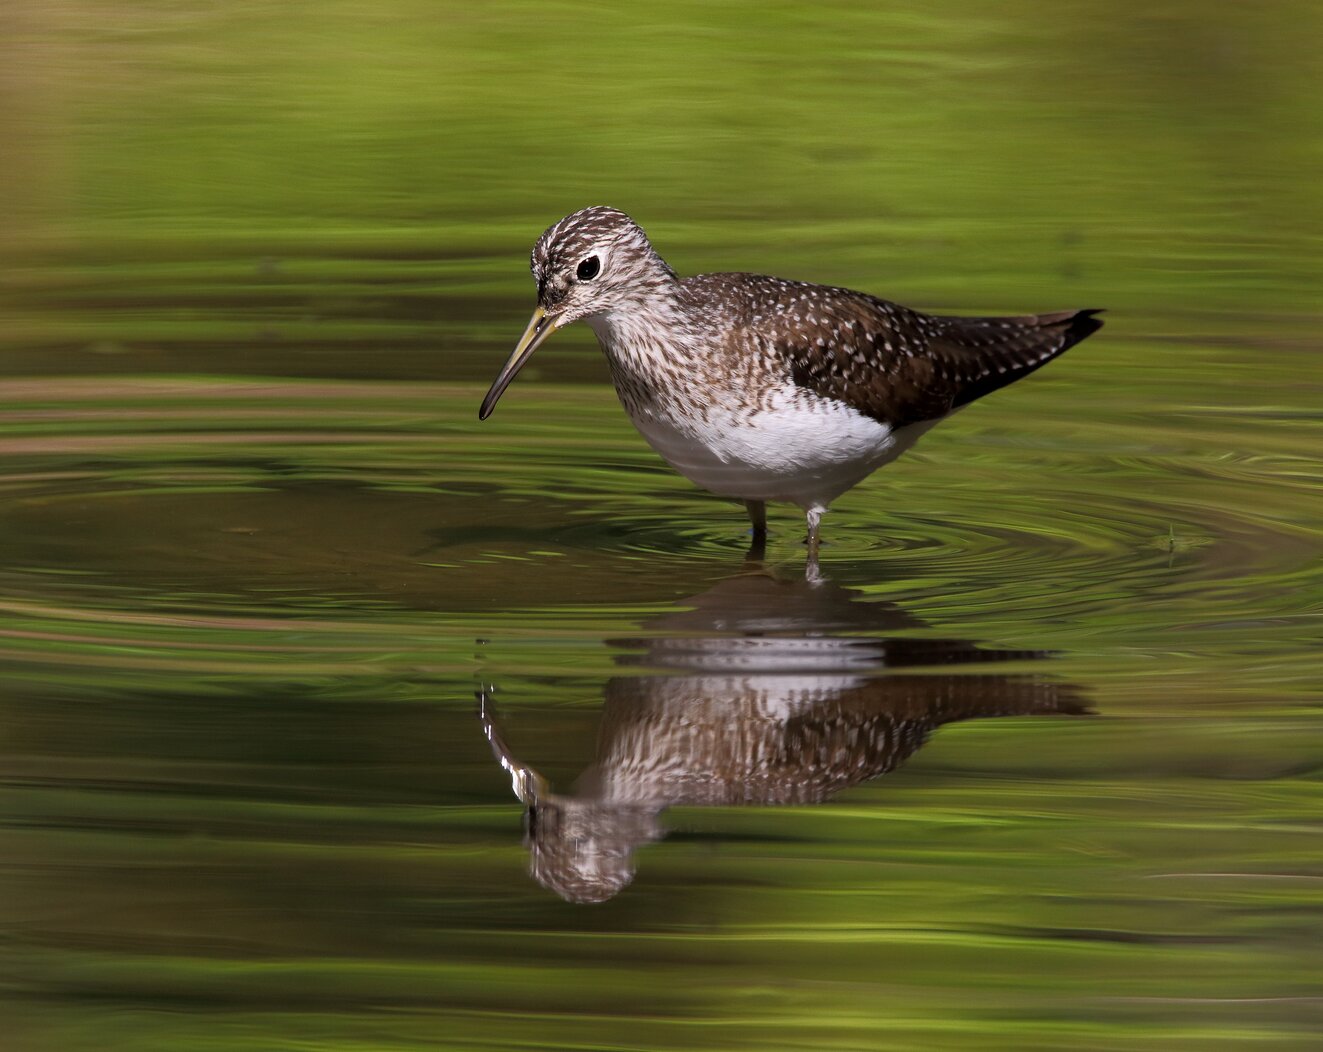 Check Long Pond for Solitary Sandpiper during migration. Photo: Isaac Grant